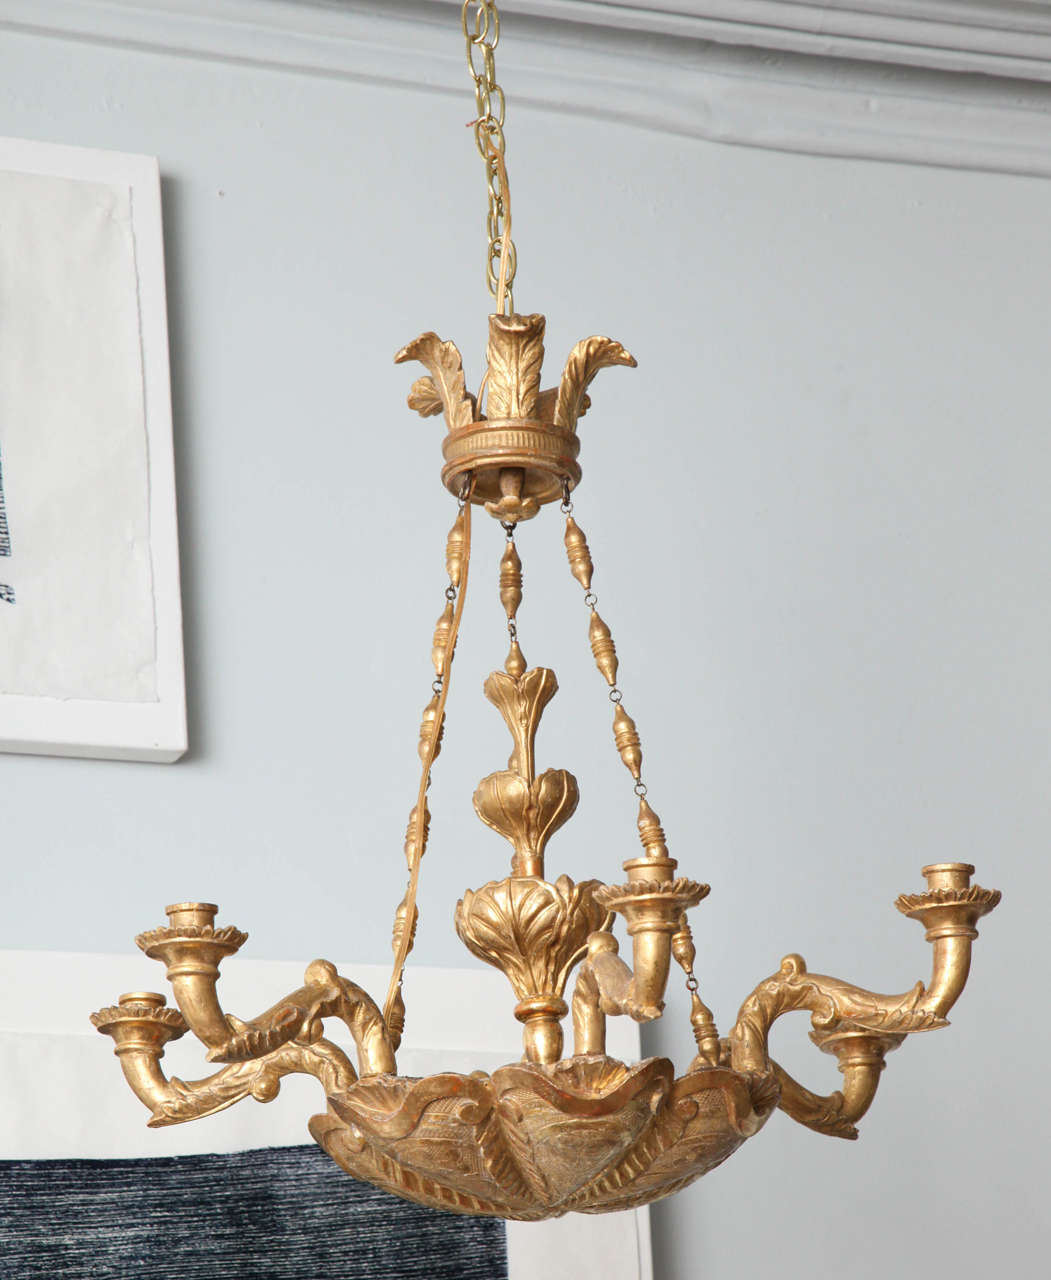 Early 19th century six lit giltwood chandelier, probably Vienna, circa 1830 having a feather carved cornice with three giltwood chains suspending a dished and loved body with scroll and leaf carving, the six arms with acanthus carving and scrolled